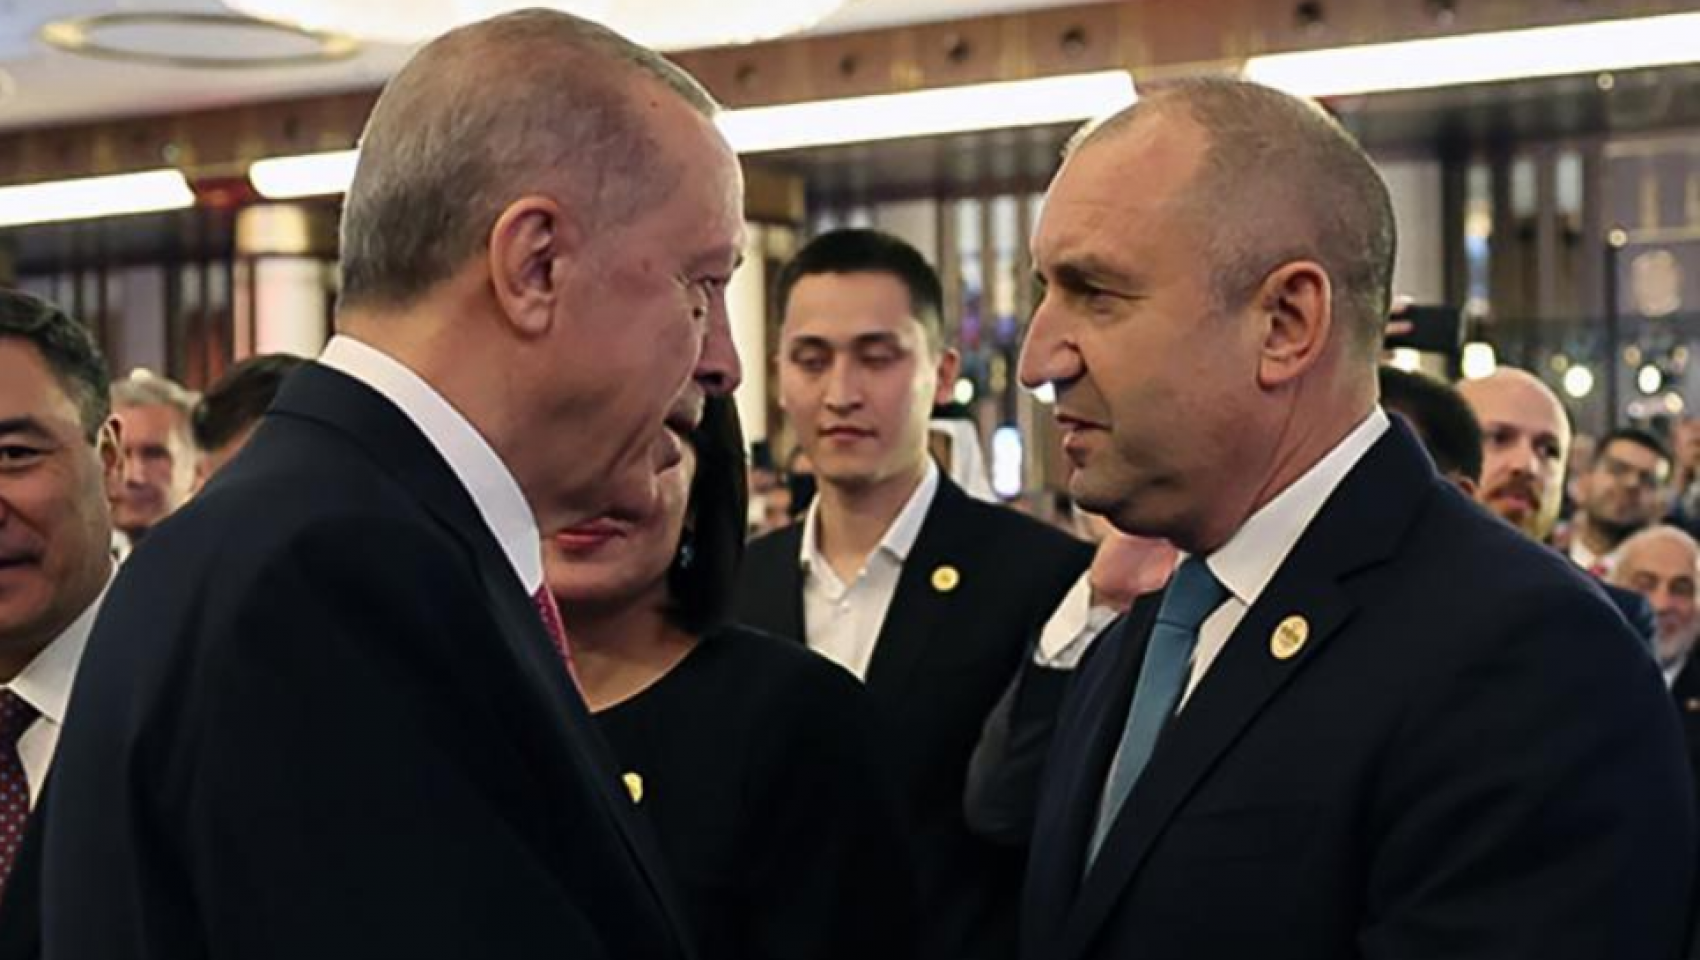 Together with the President of Turkey, Recep Tayyip Erdogan, we